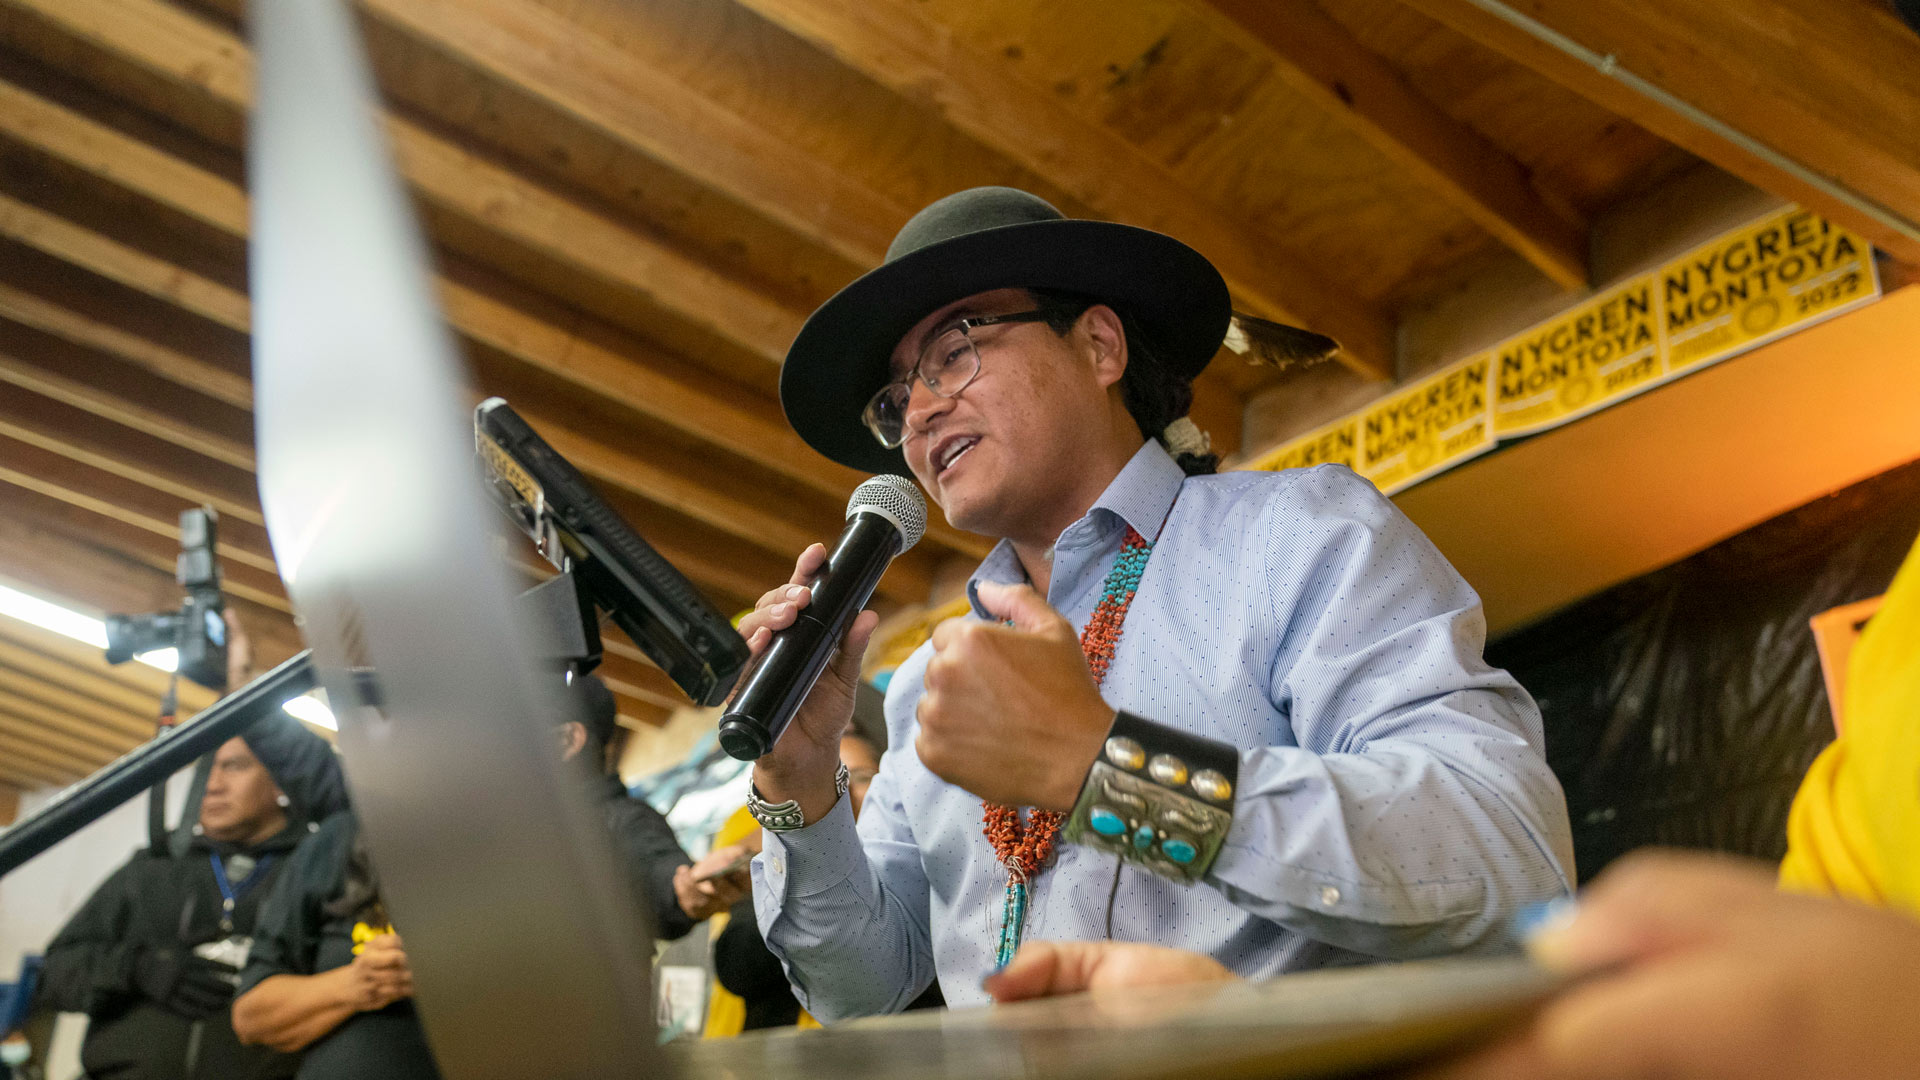 Buu Nygren announces his win for the Navajo Nation president as he reads tabulated votes from chapter houses across the reservation at his campaign's watch party at the Navajo Nation fairgrounds in Window Rock, Ariz., on Tuesday, Nov. 8, 2022.